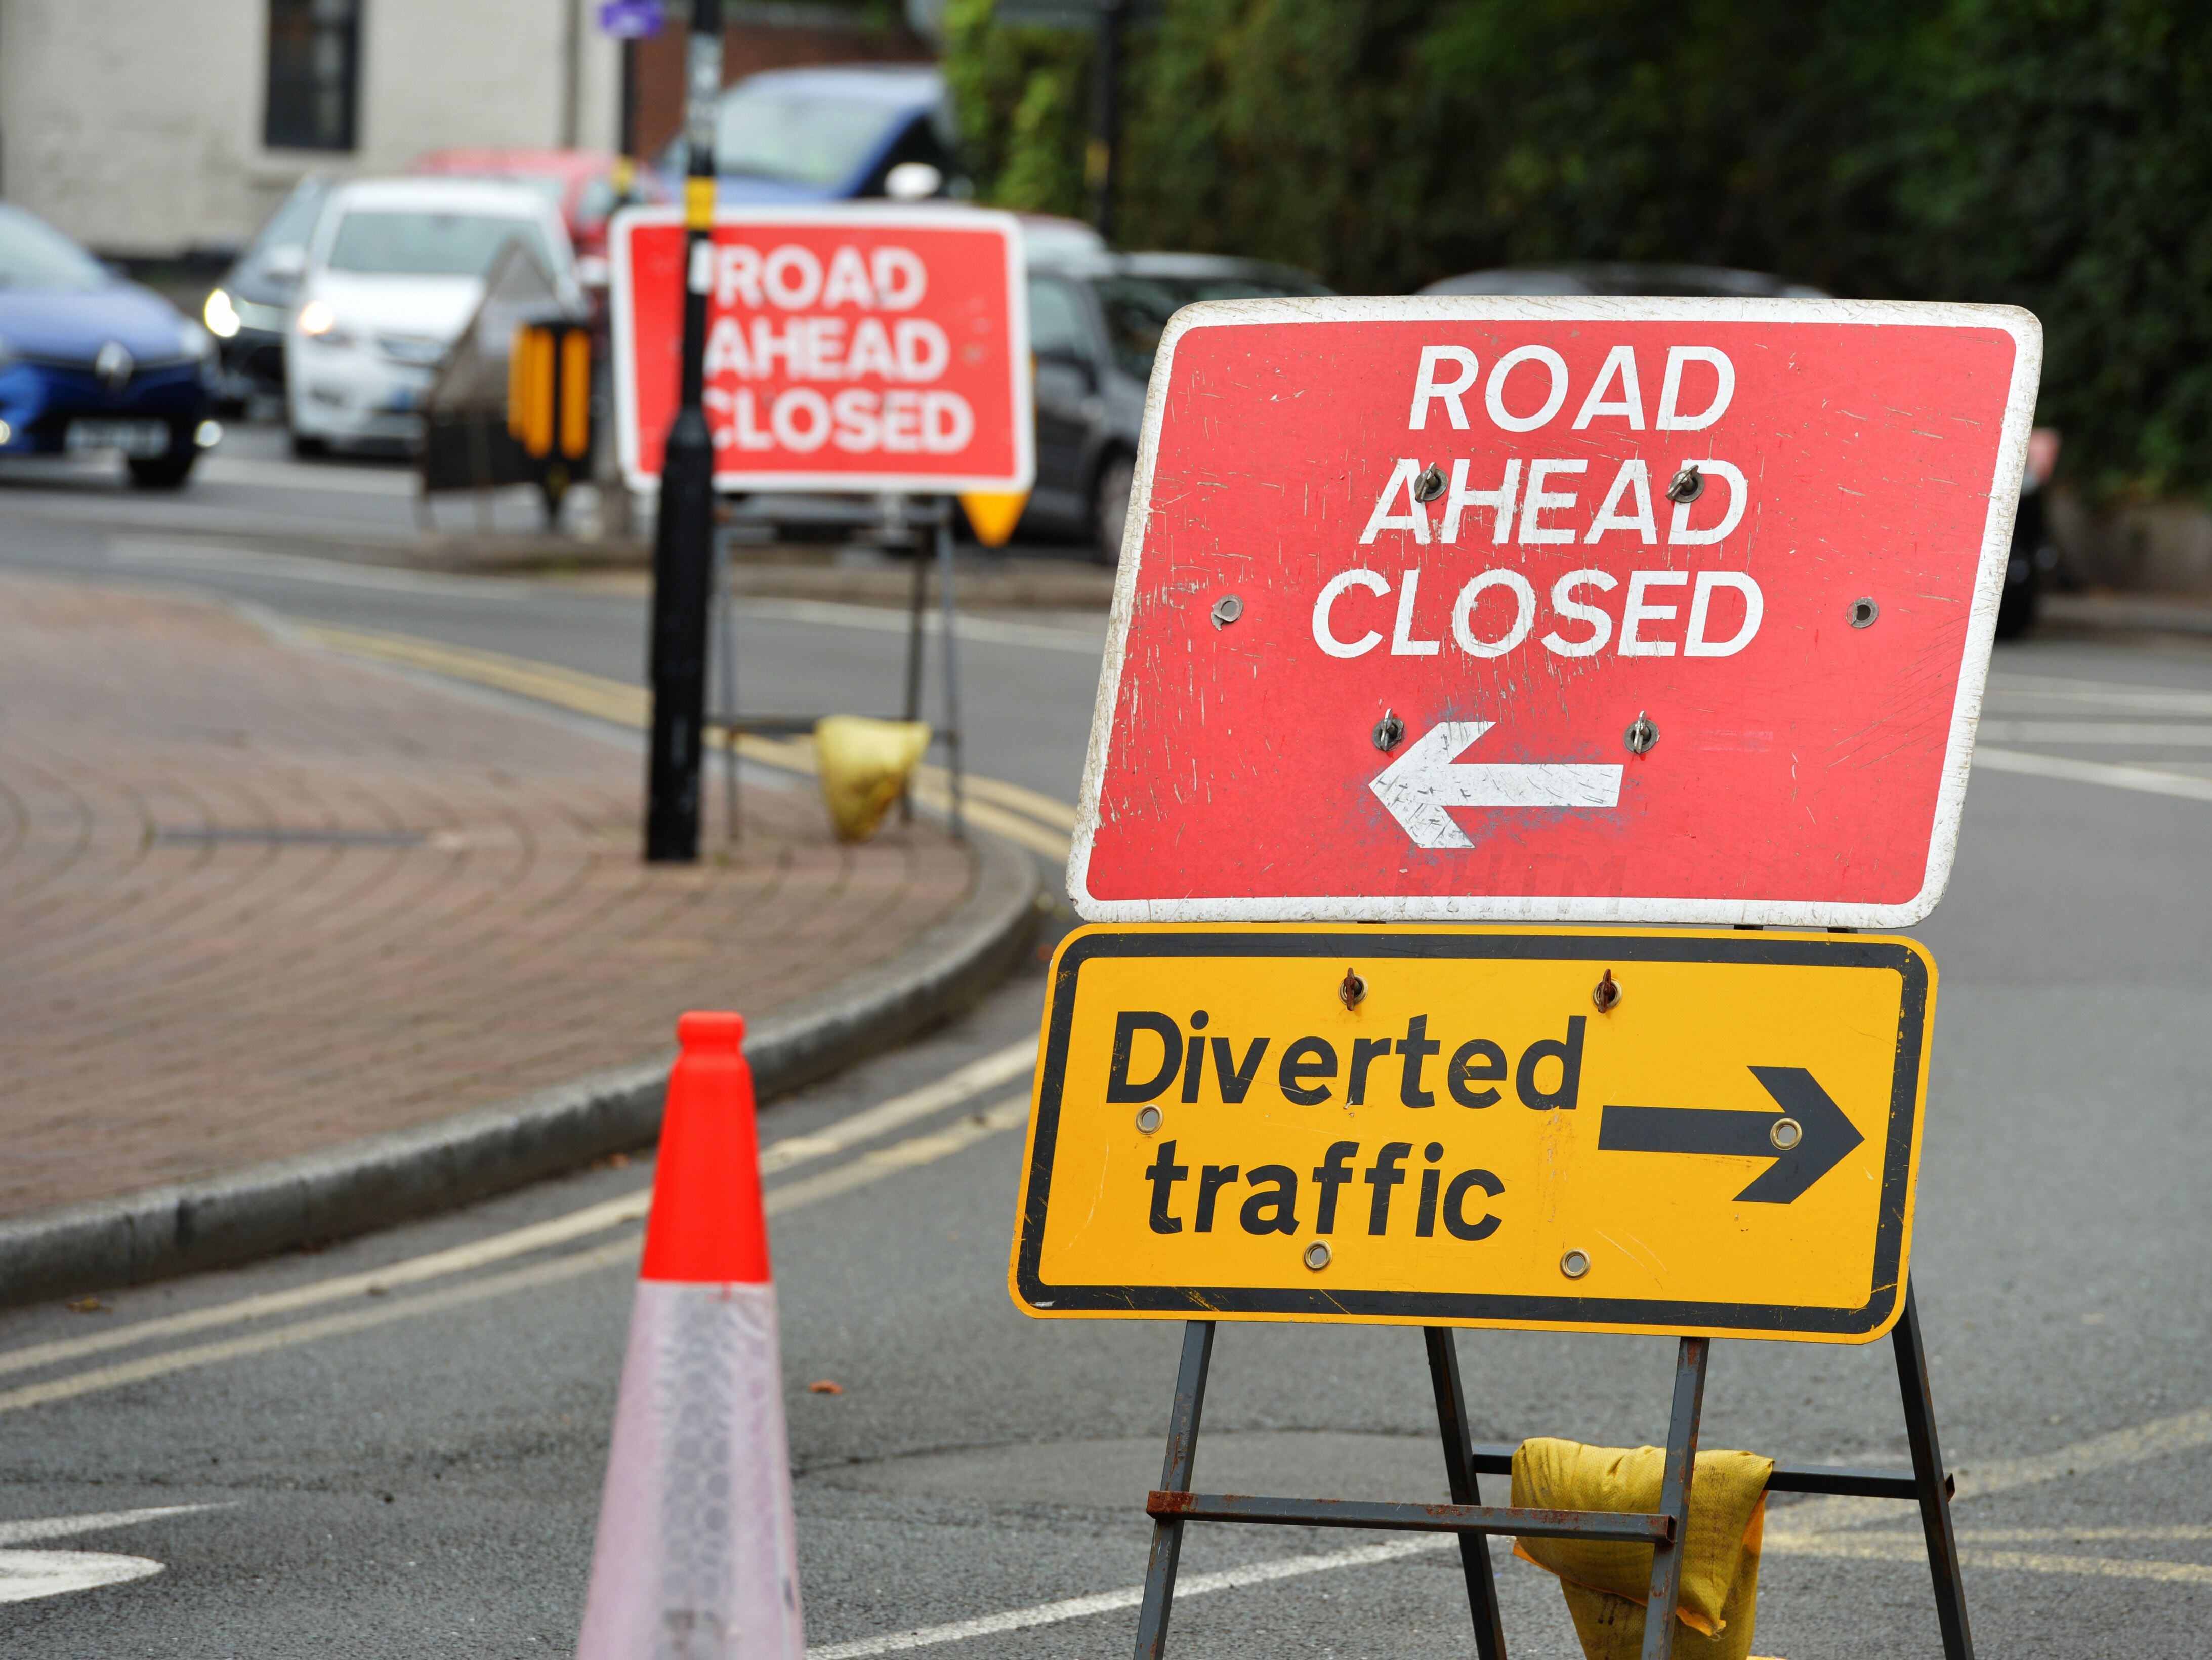 Roadworks on the way across region while council plans to consult on selling plot of land